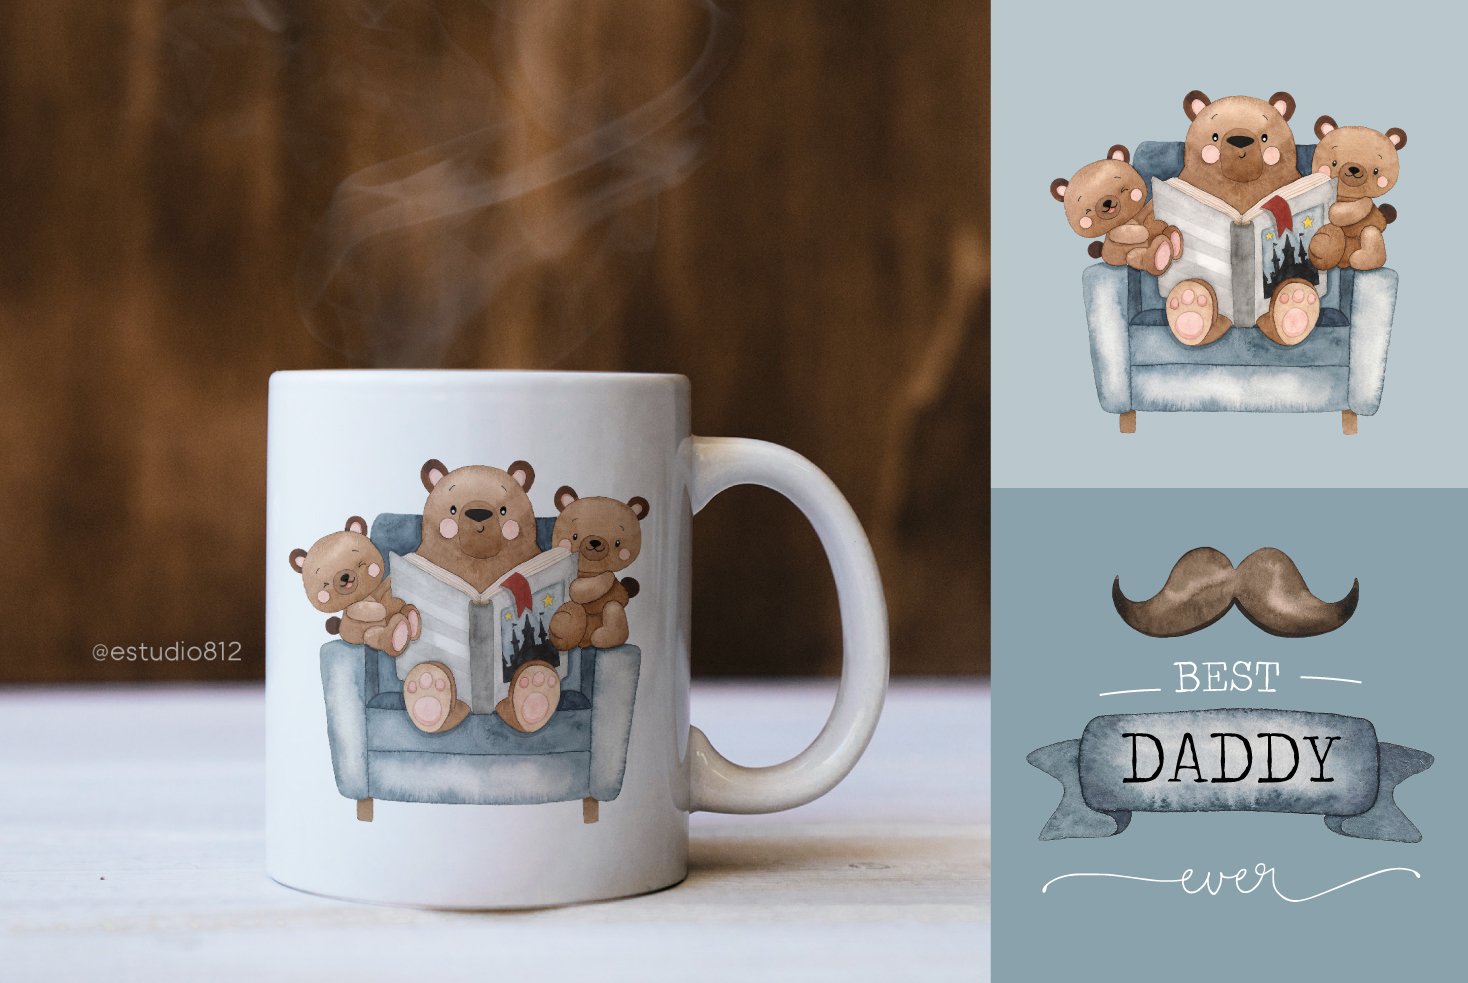 White tea cup with the Super daddy illustration.